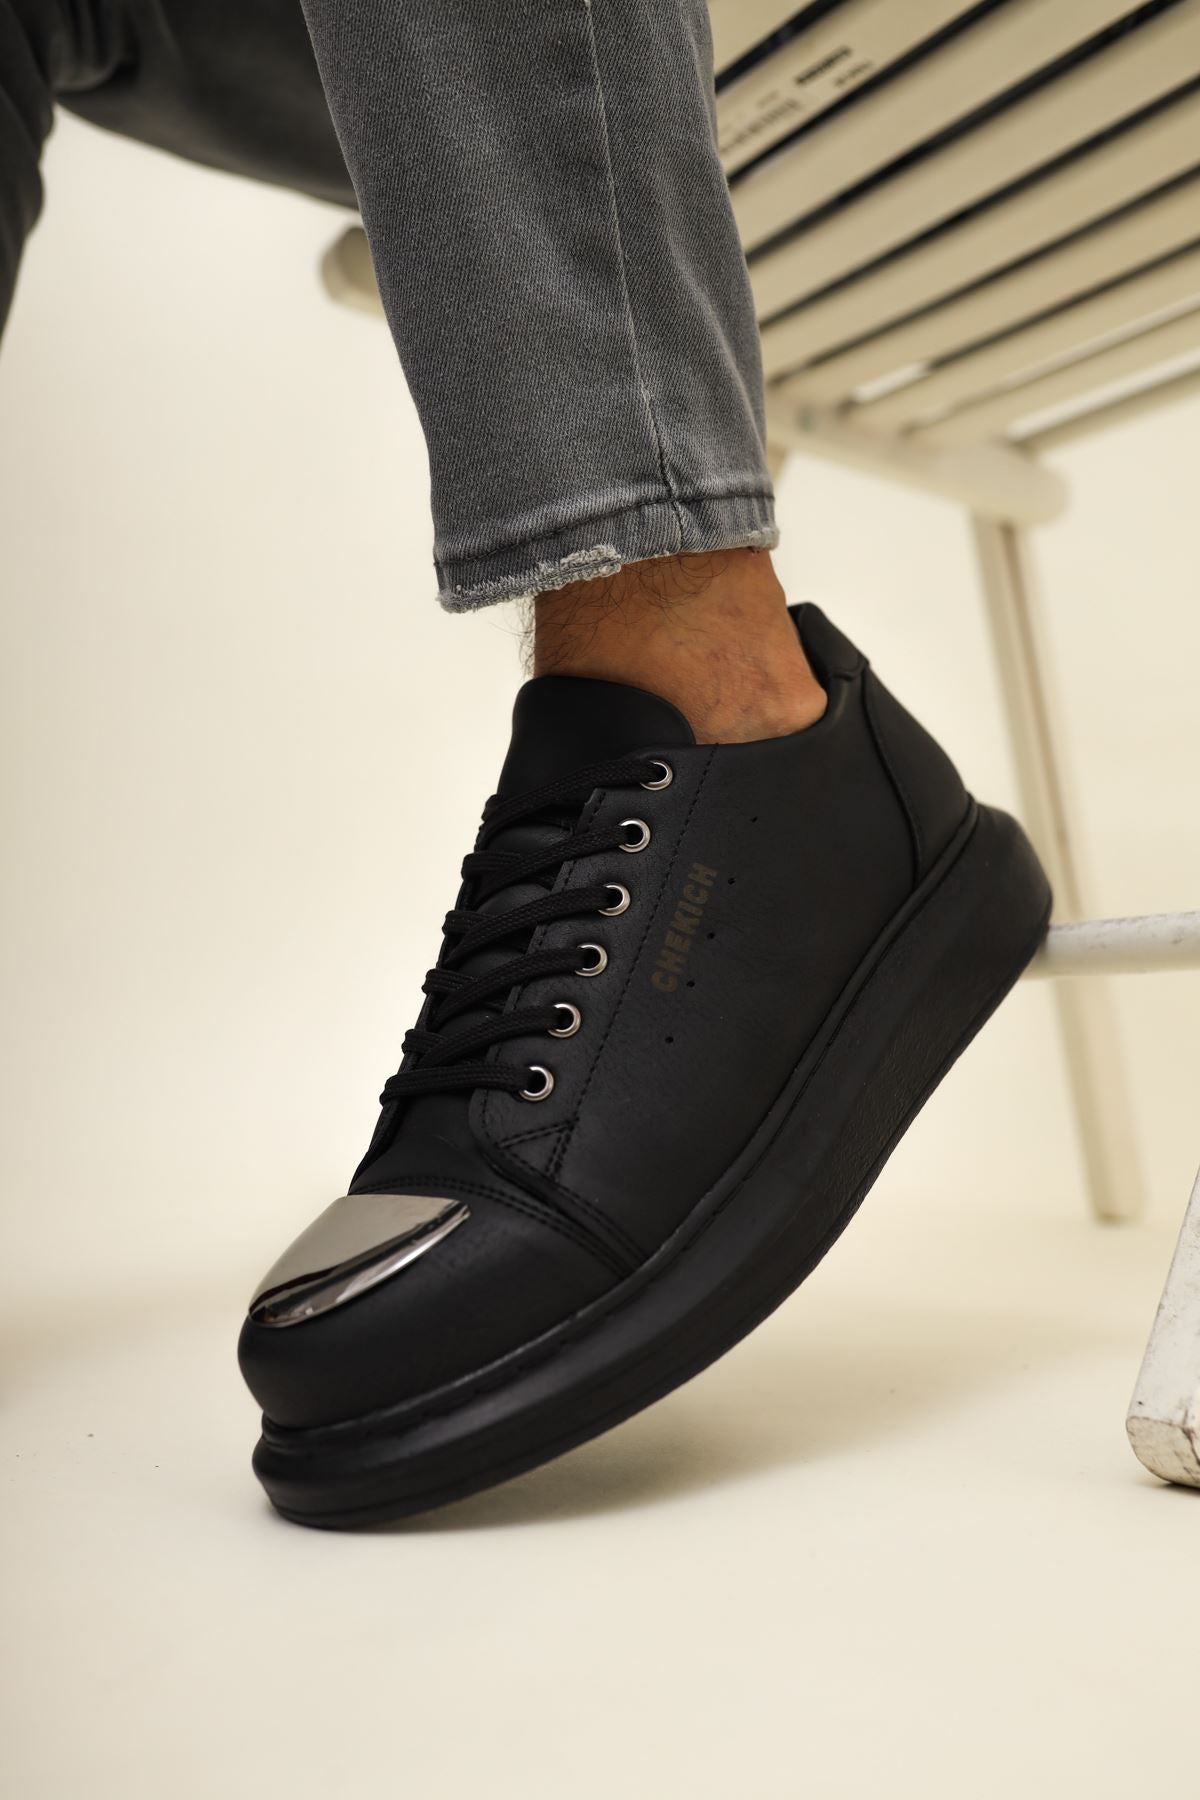 CH175 ST Men's Sneakers Shoes BLACK - STREETMODE ™